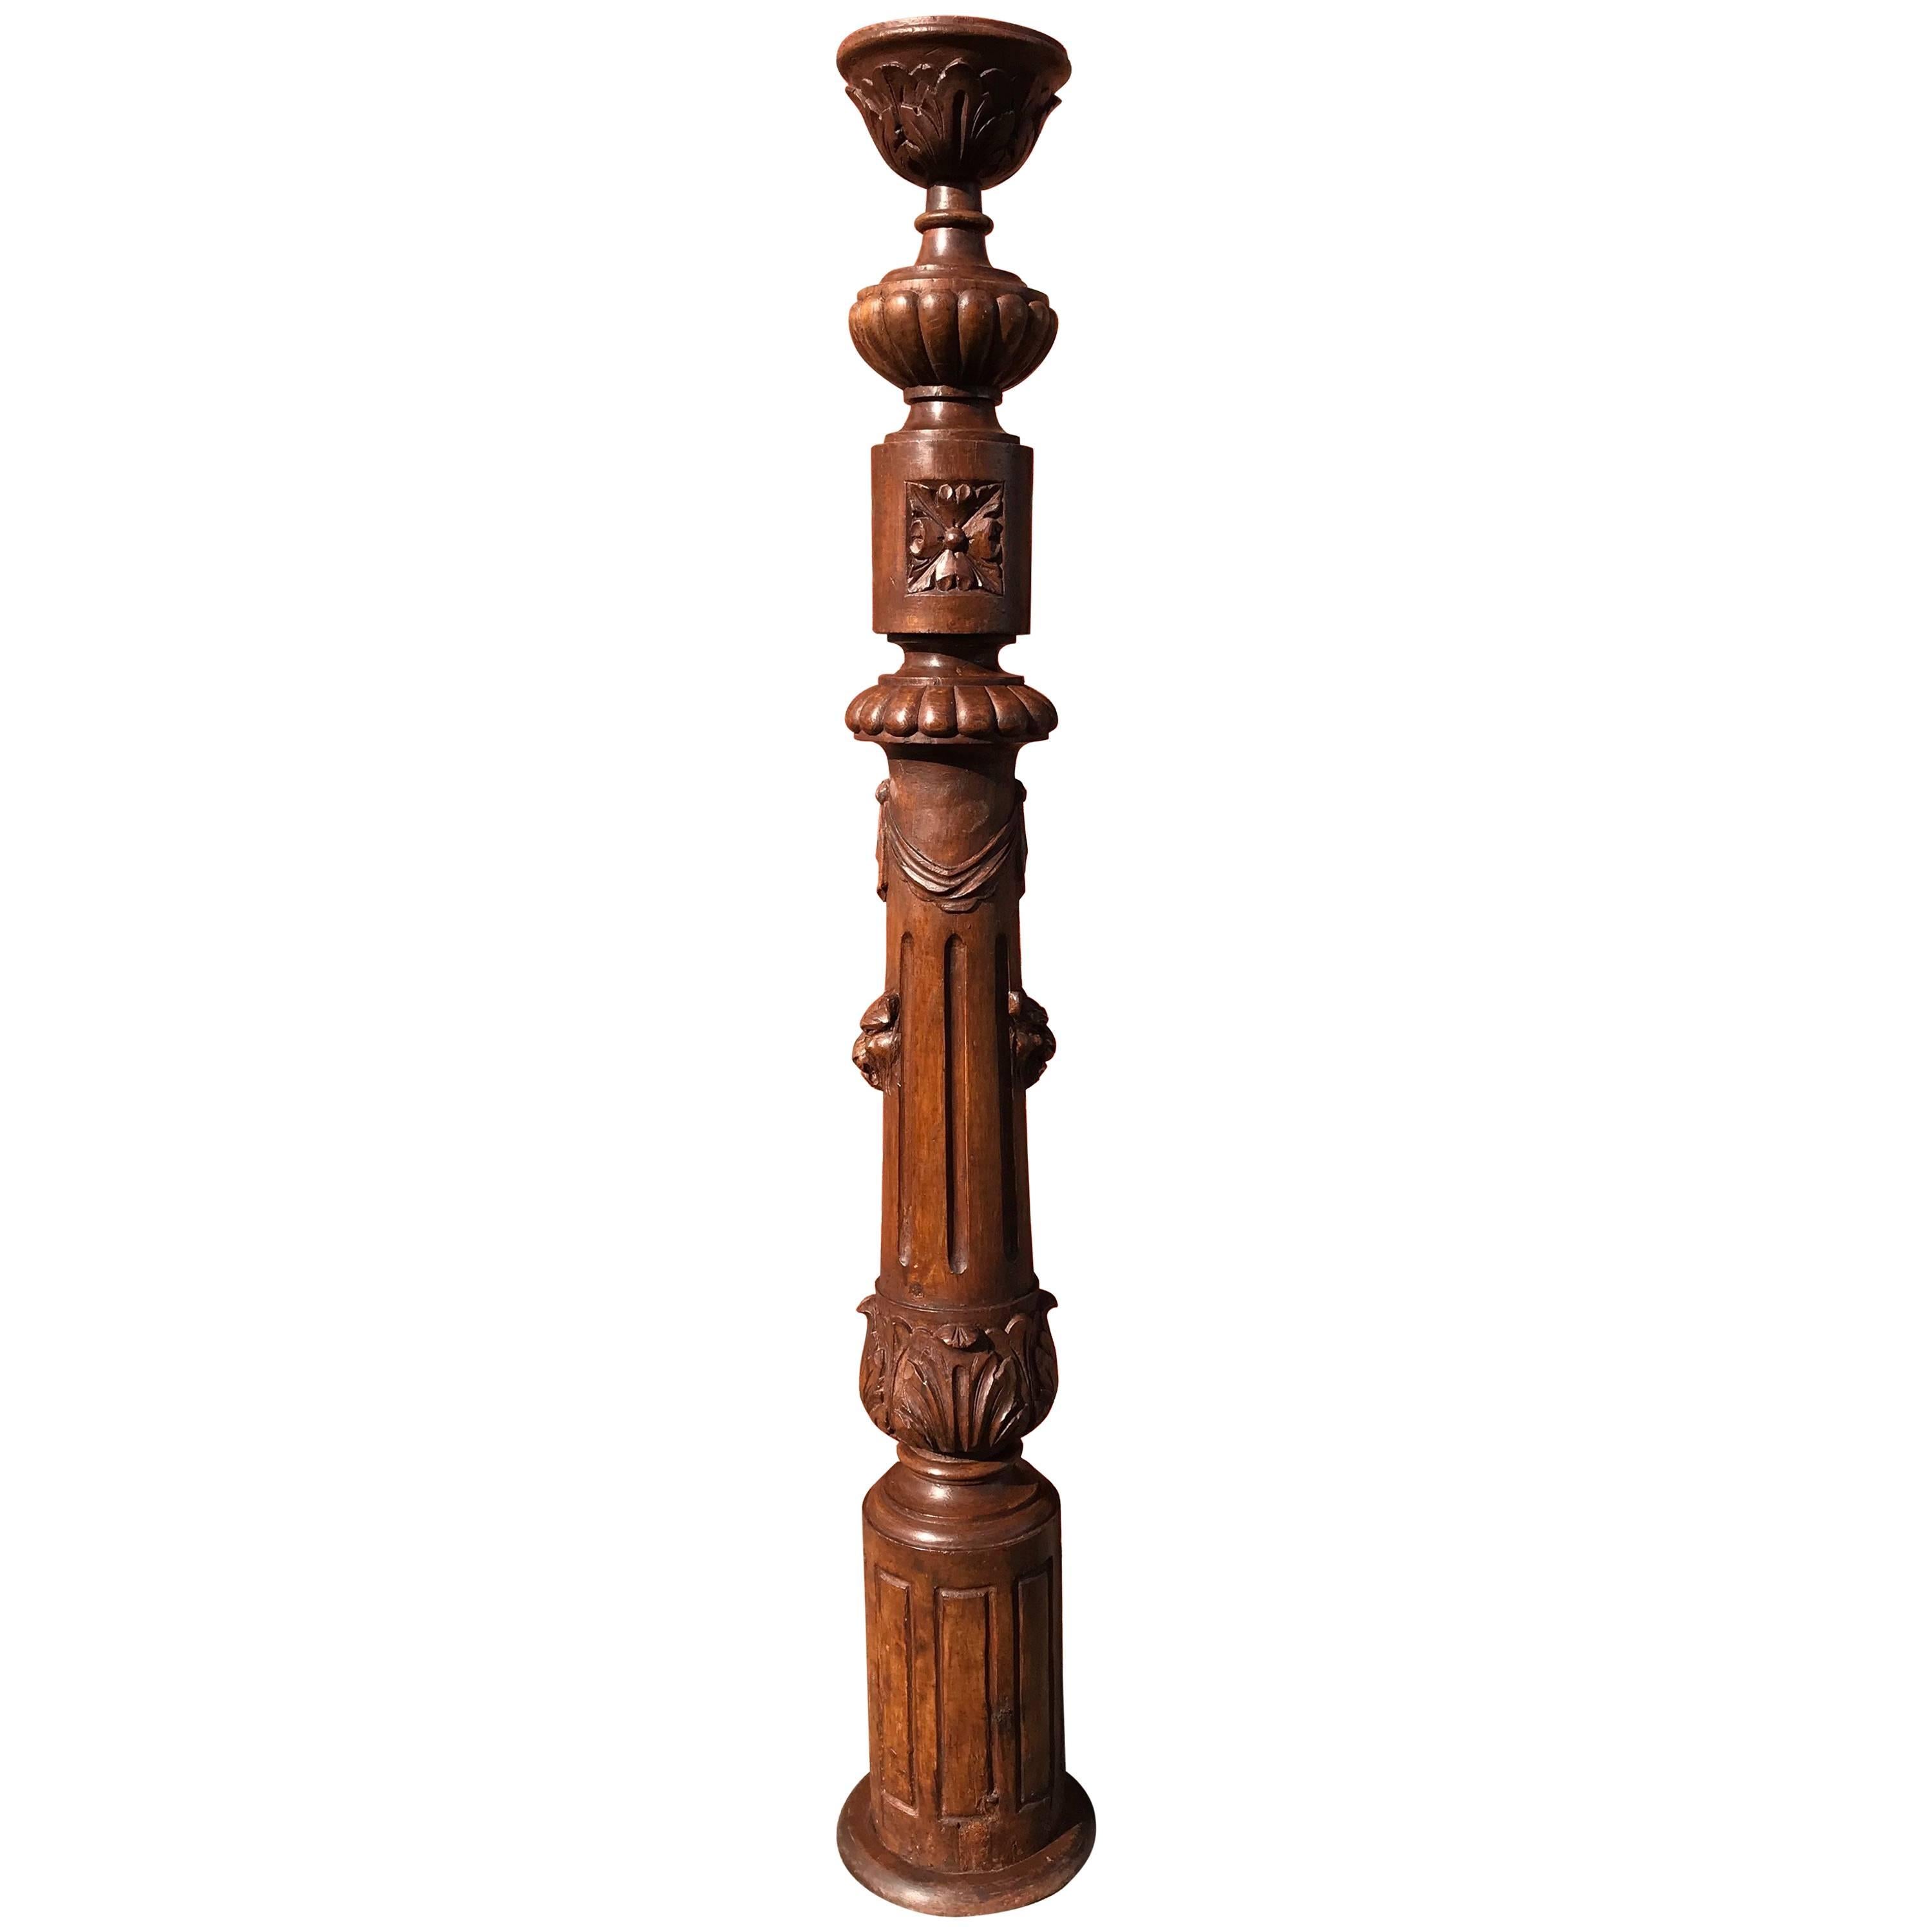 Impressive Wooden Stair Newel Post or Display Pedestal with Carved Lion Heads For Sale